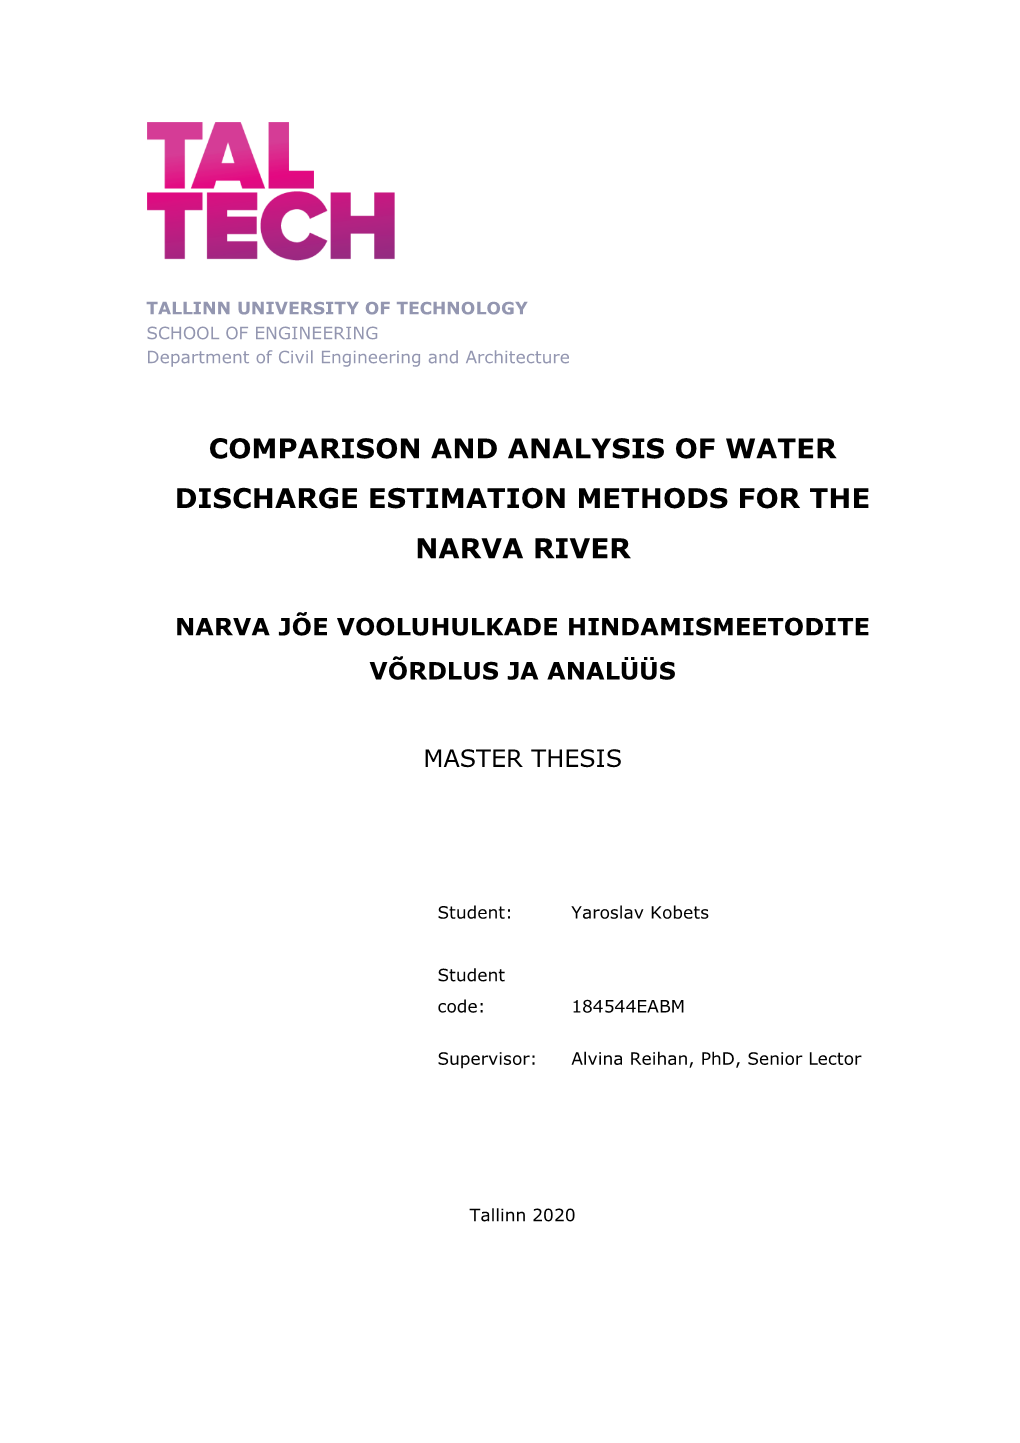 Comparison and Analysis of Water Discharge Estimation Methods for the Narva River